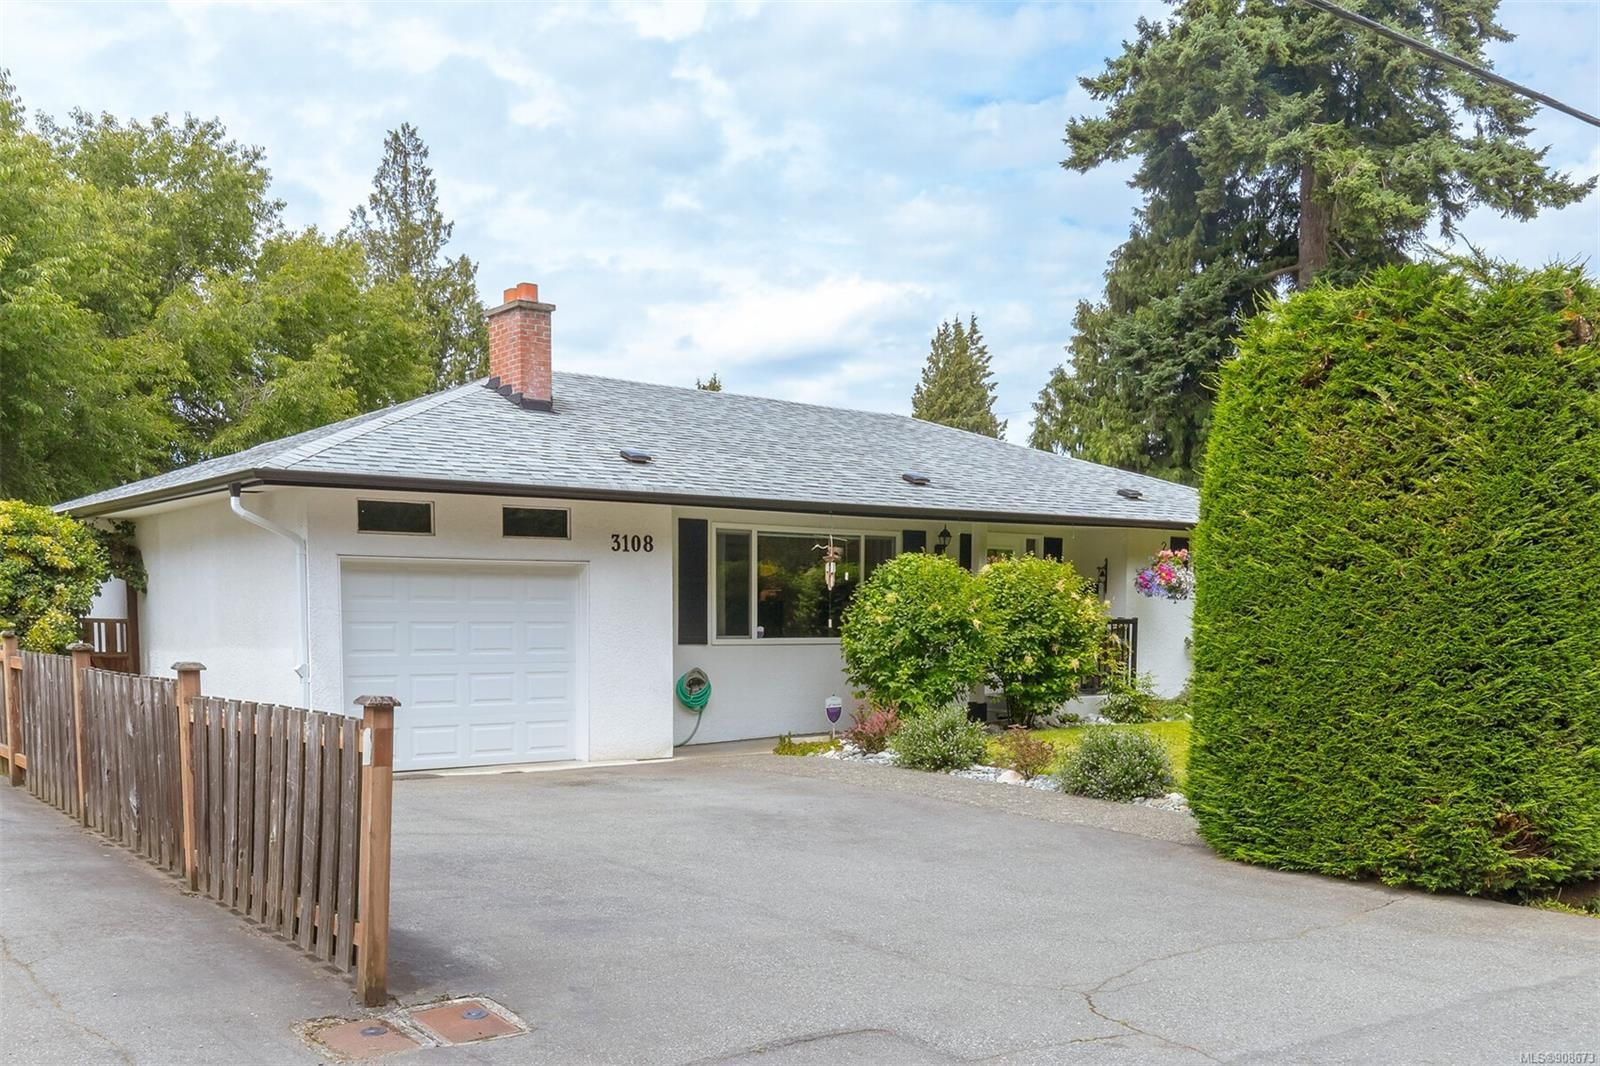 I have sold a property at 3108 Wishart Rd in Colwood
